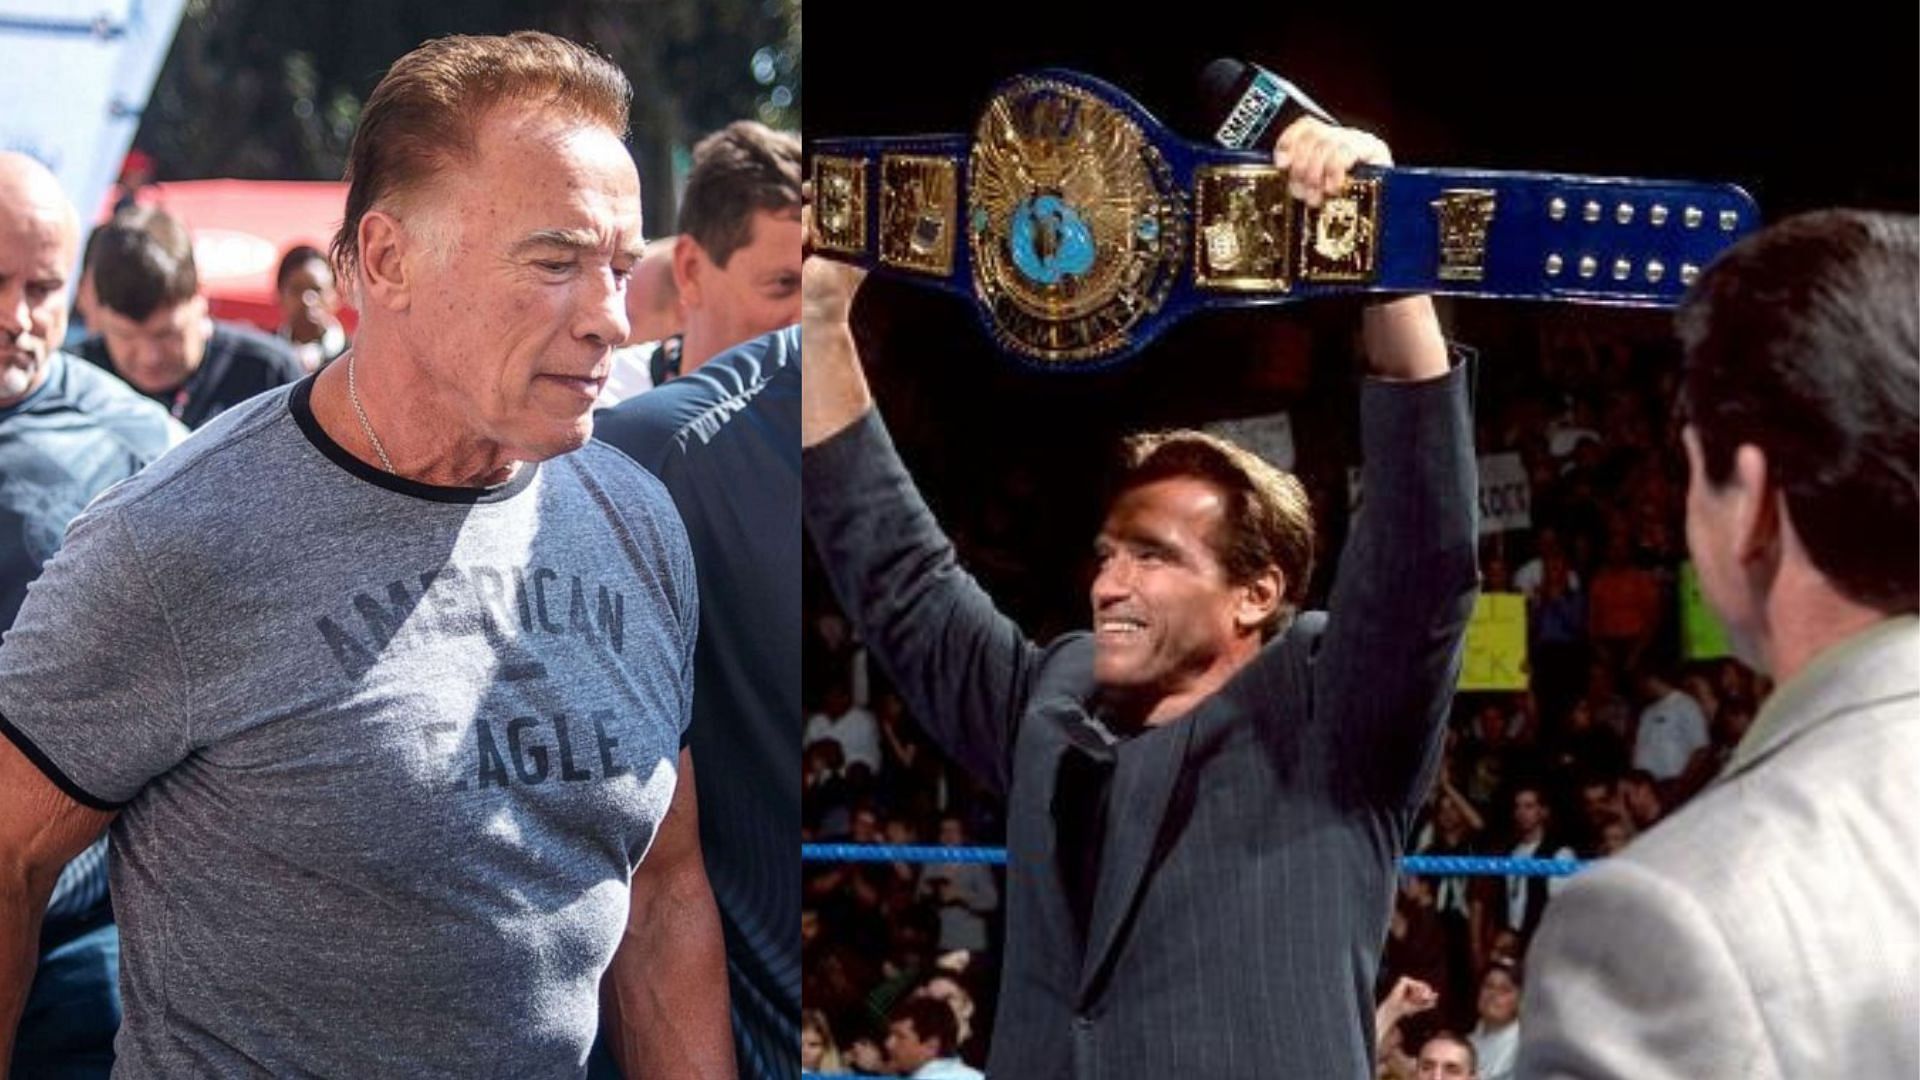 Arnold Schwarzenegger had notable appearances in WWE over the years